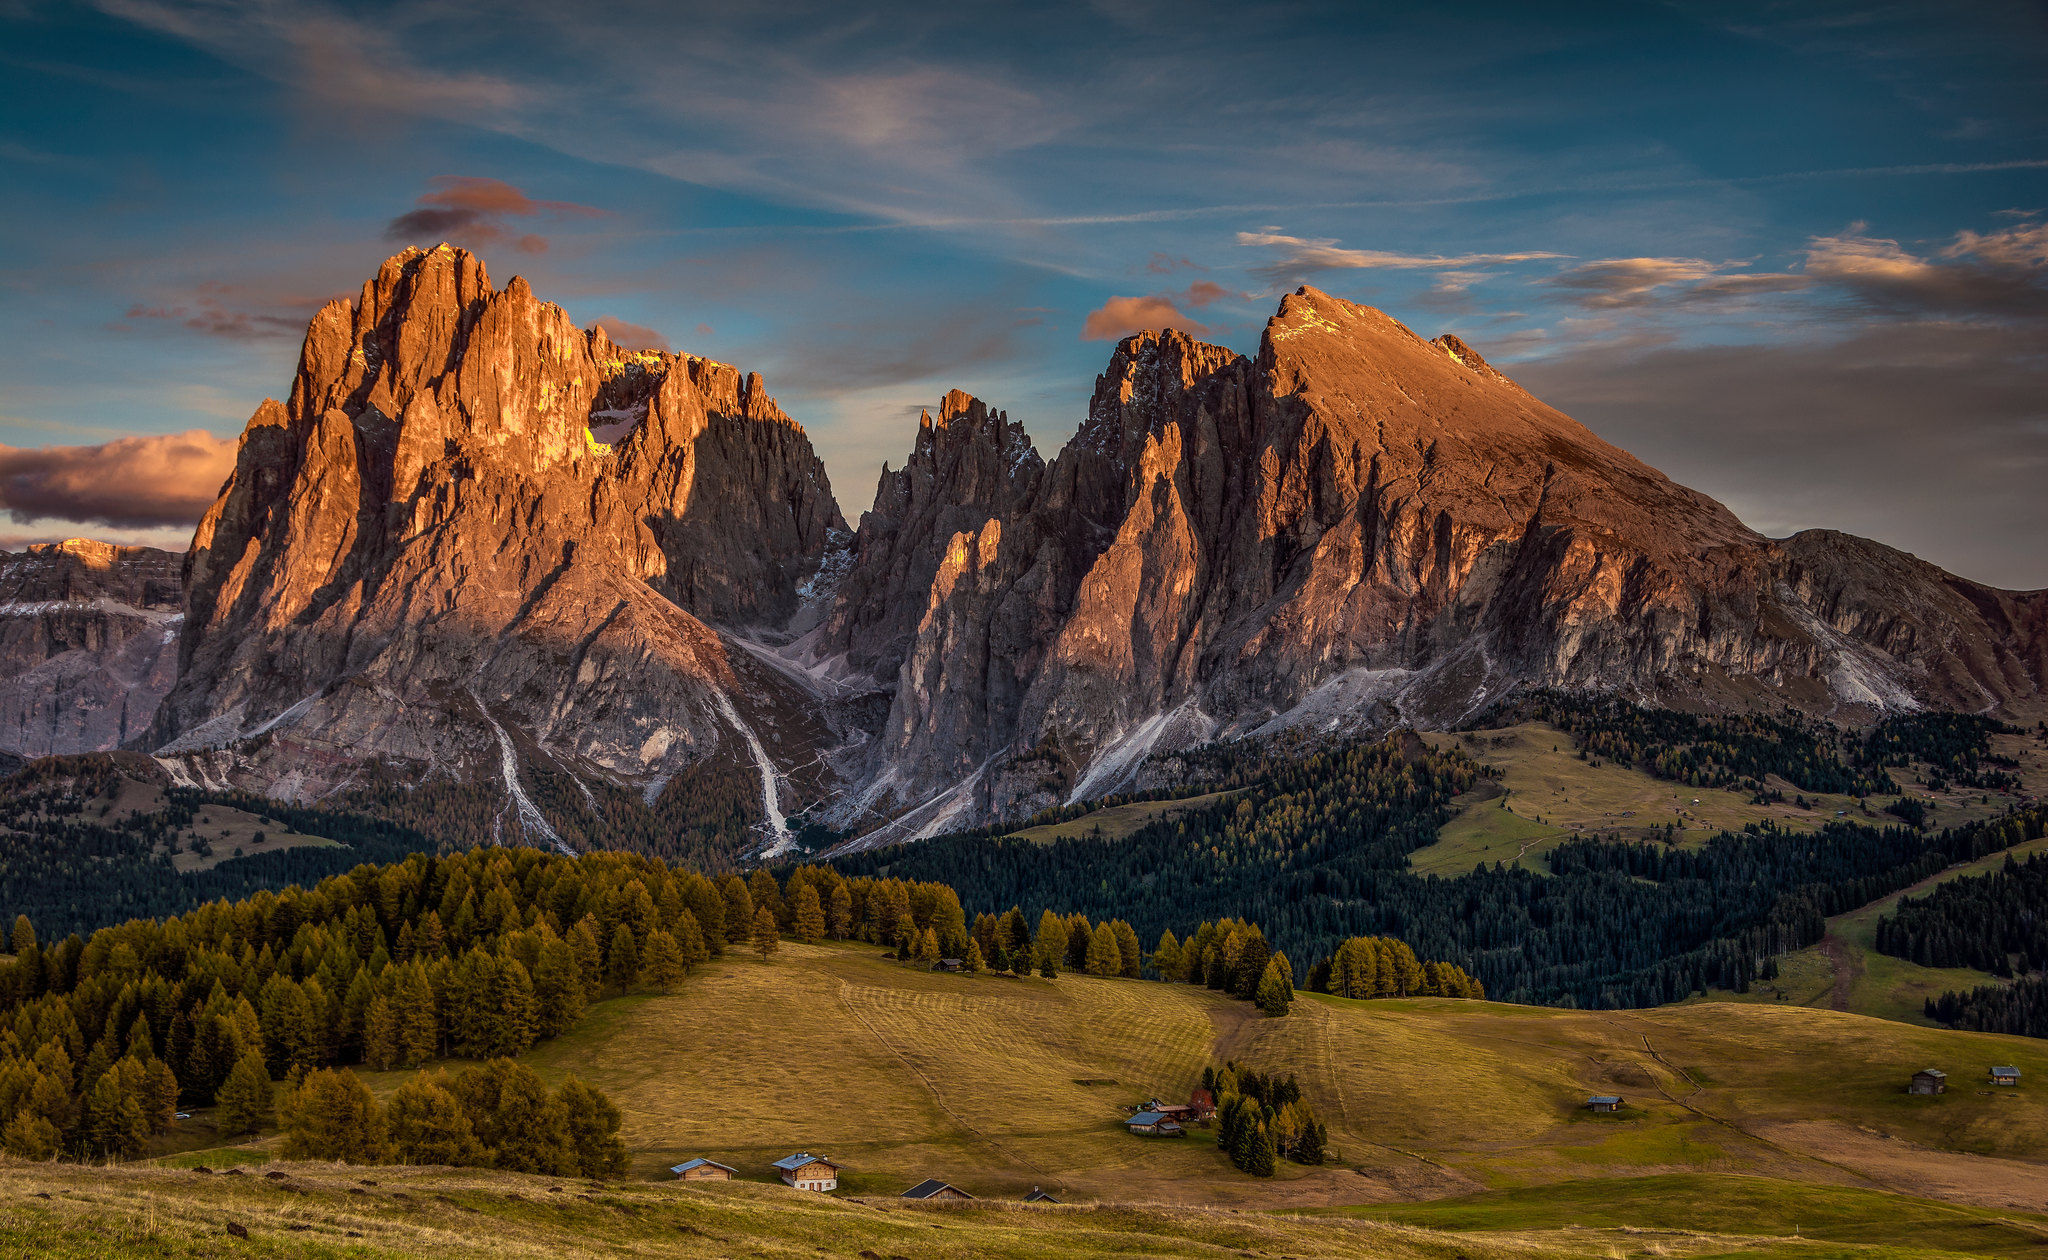 General 2048x1260 nature landscape house village mountains clouds sky trees sunlight field hills sunset Dolomites Italy